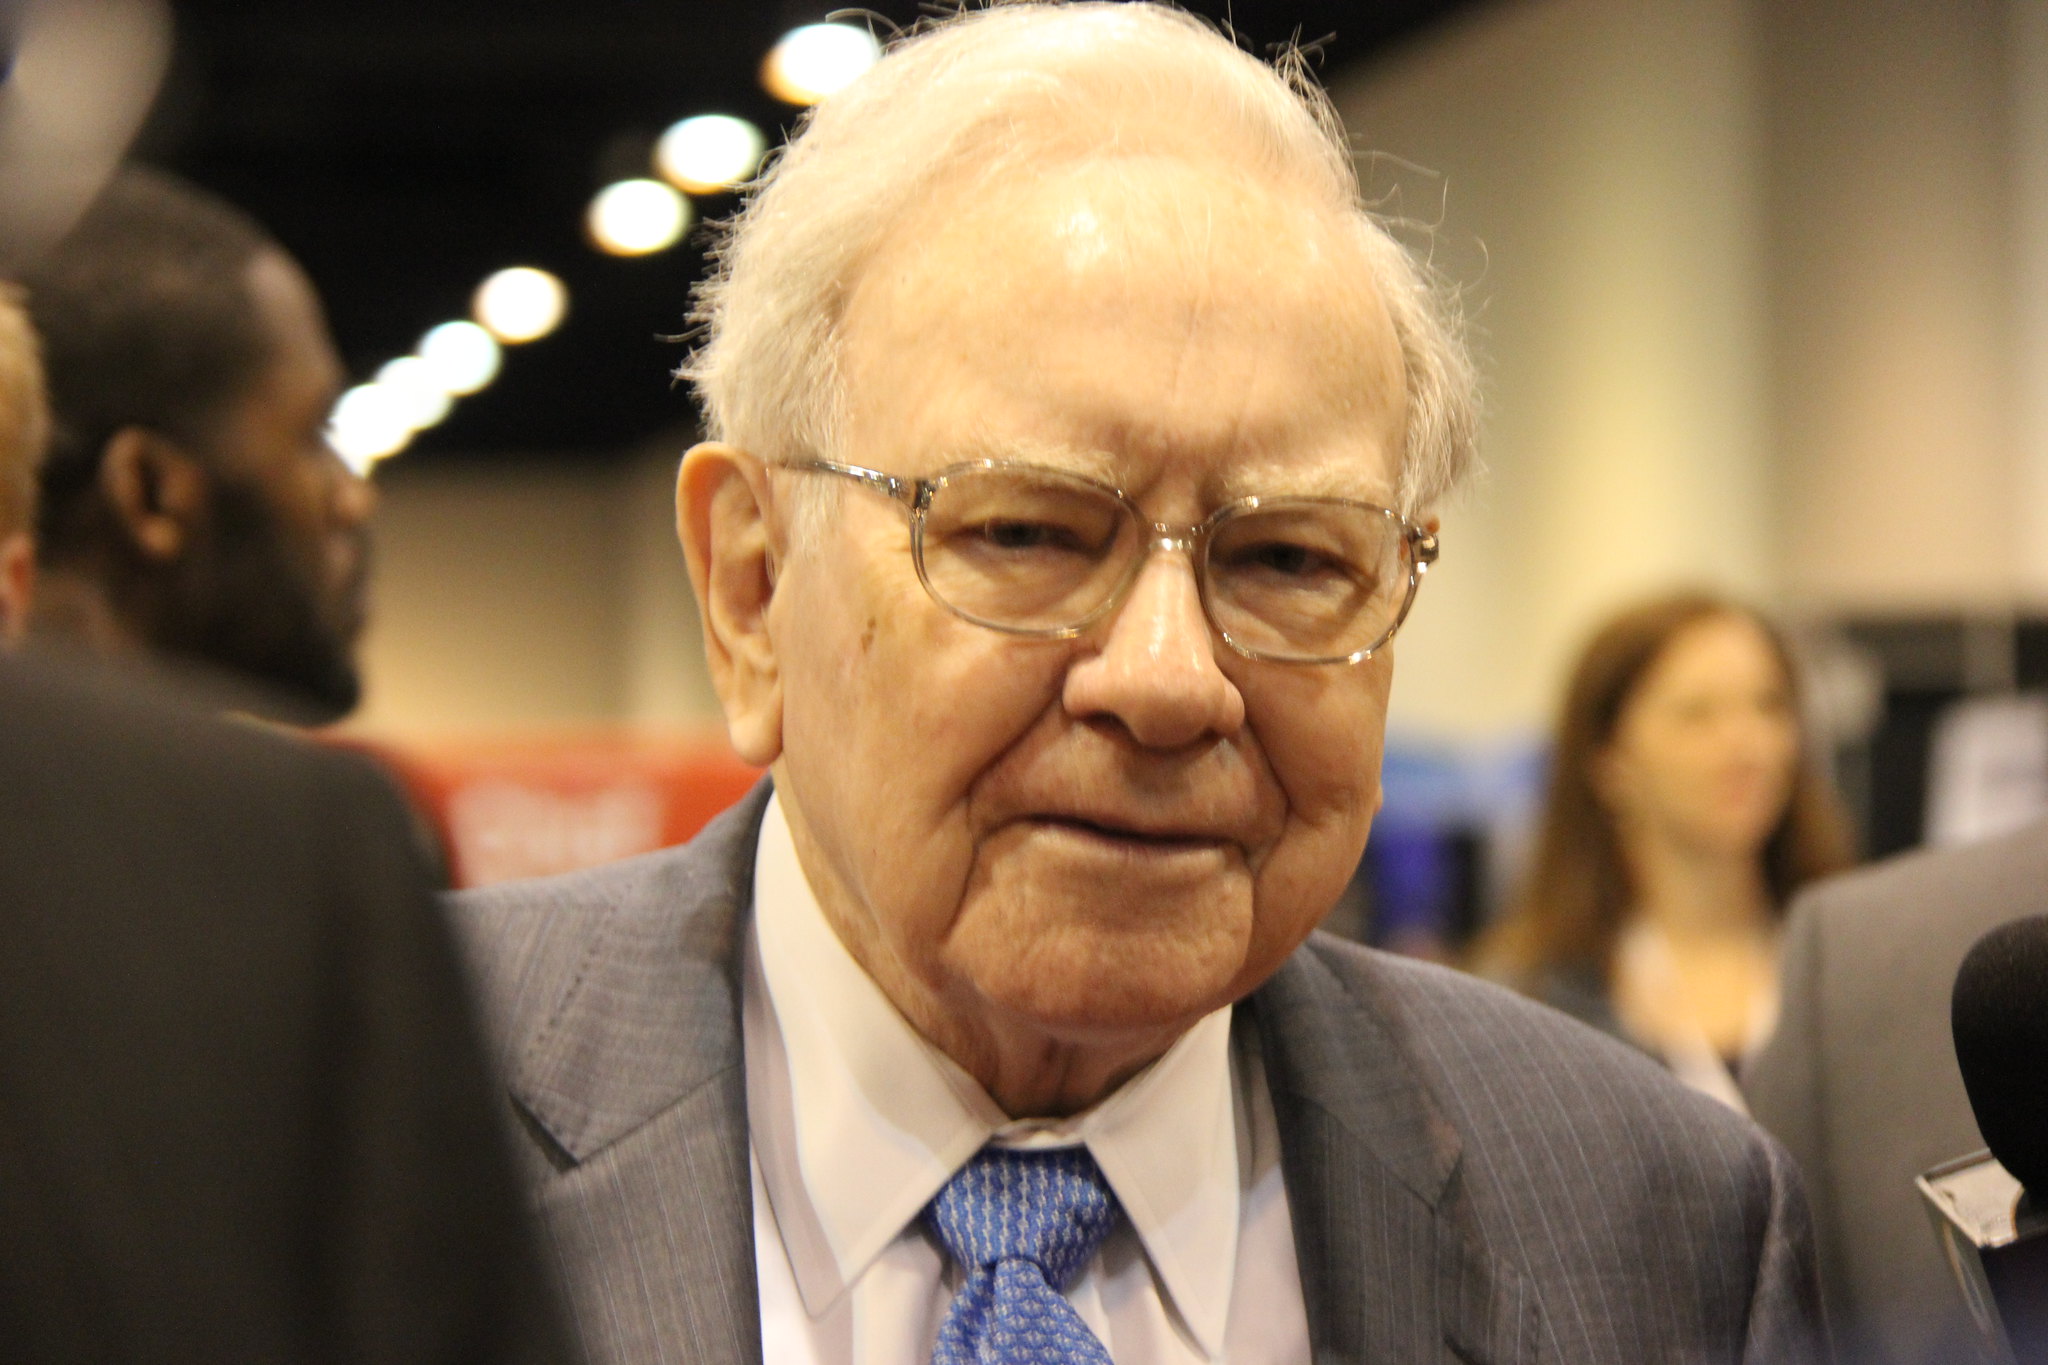 Warren Buffett''s Latest $1.3 Billion Buy Brings His Total Investment in This Stock to More Than $71 Billion in 5 Years